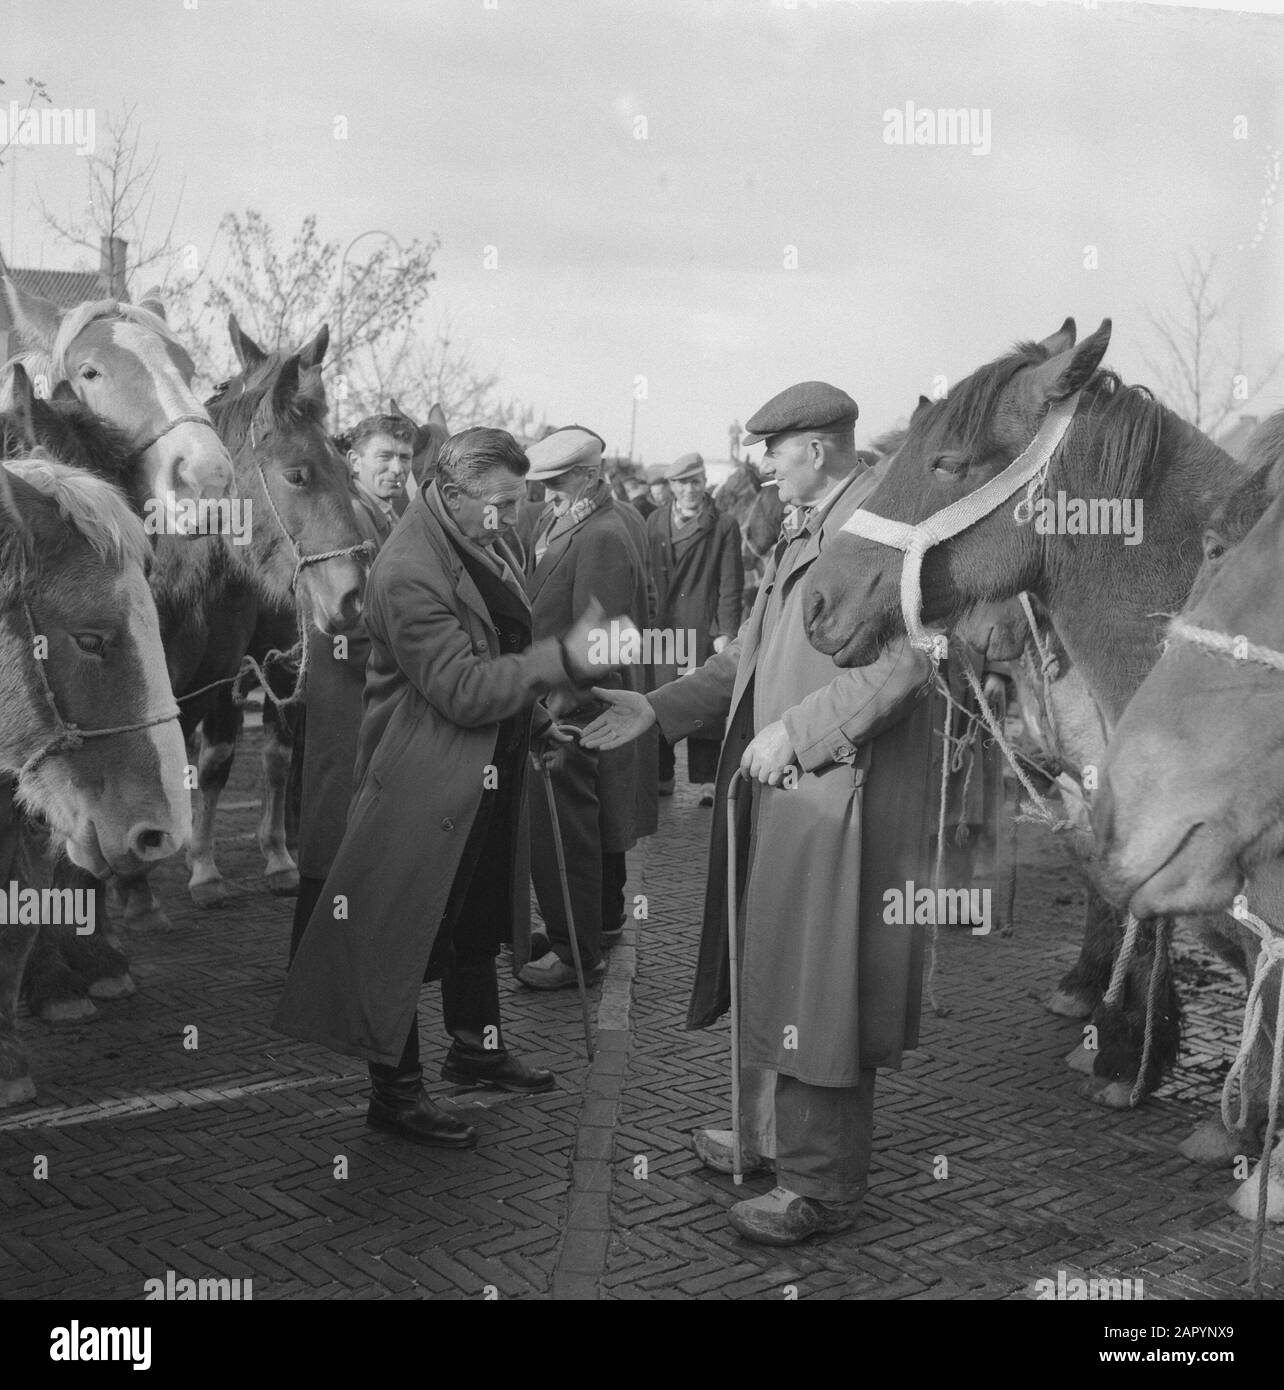 Annual horse market at Hedel Date: November 7, 1960 Location: Hedel Keywords: horse markets Stock Photo